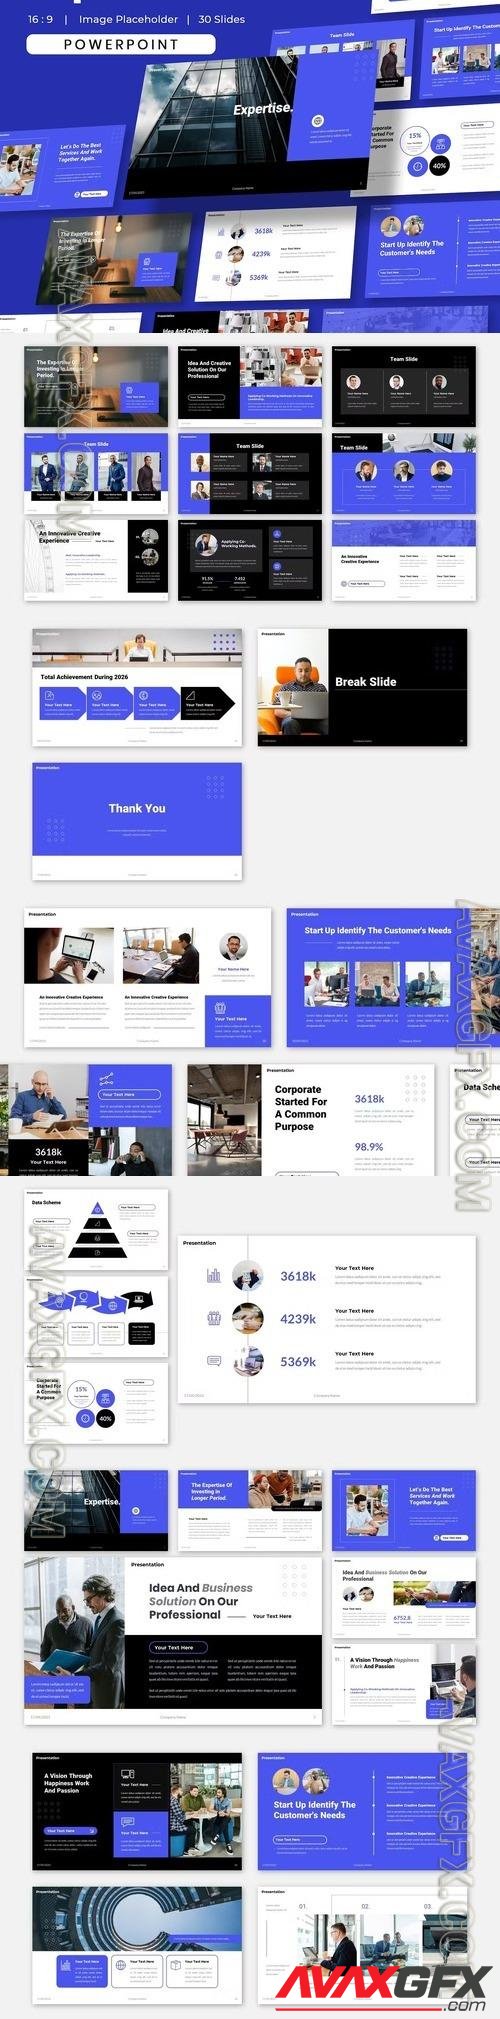 Expertise - Professional Company Powerpoint [PPTX]